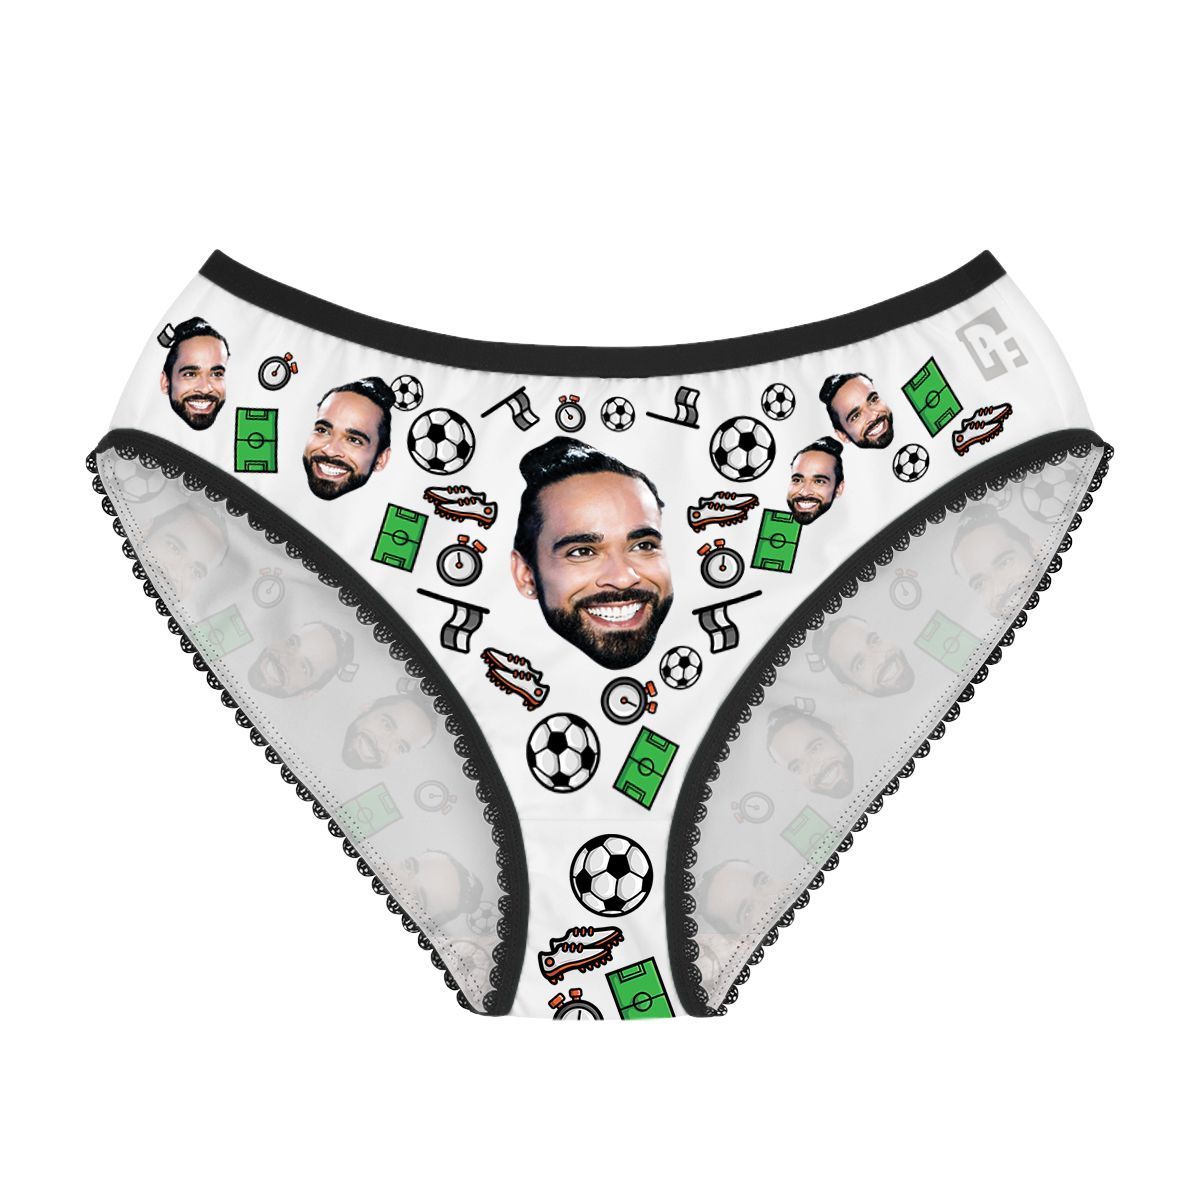 White Football women's underwear briefs personalized with photo printed on them